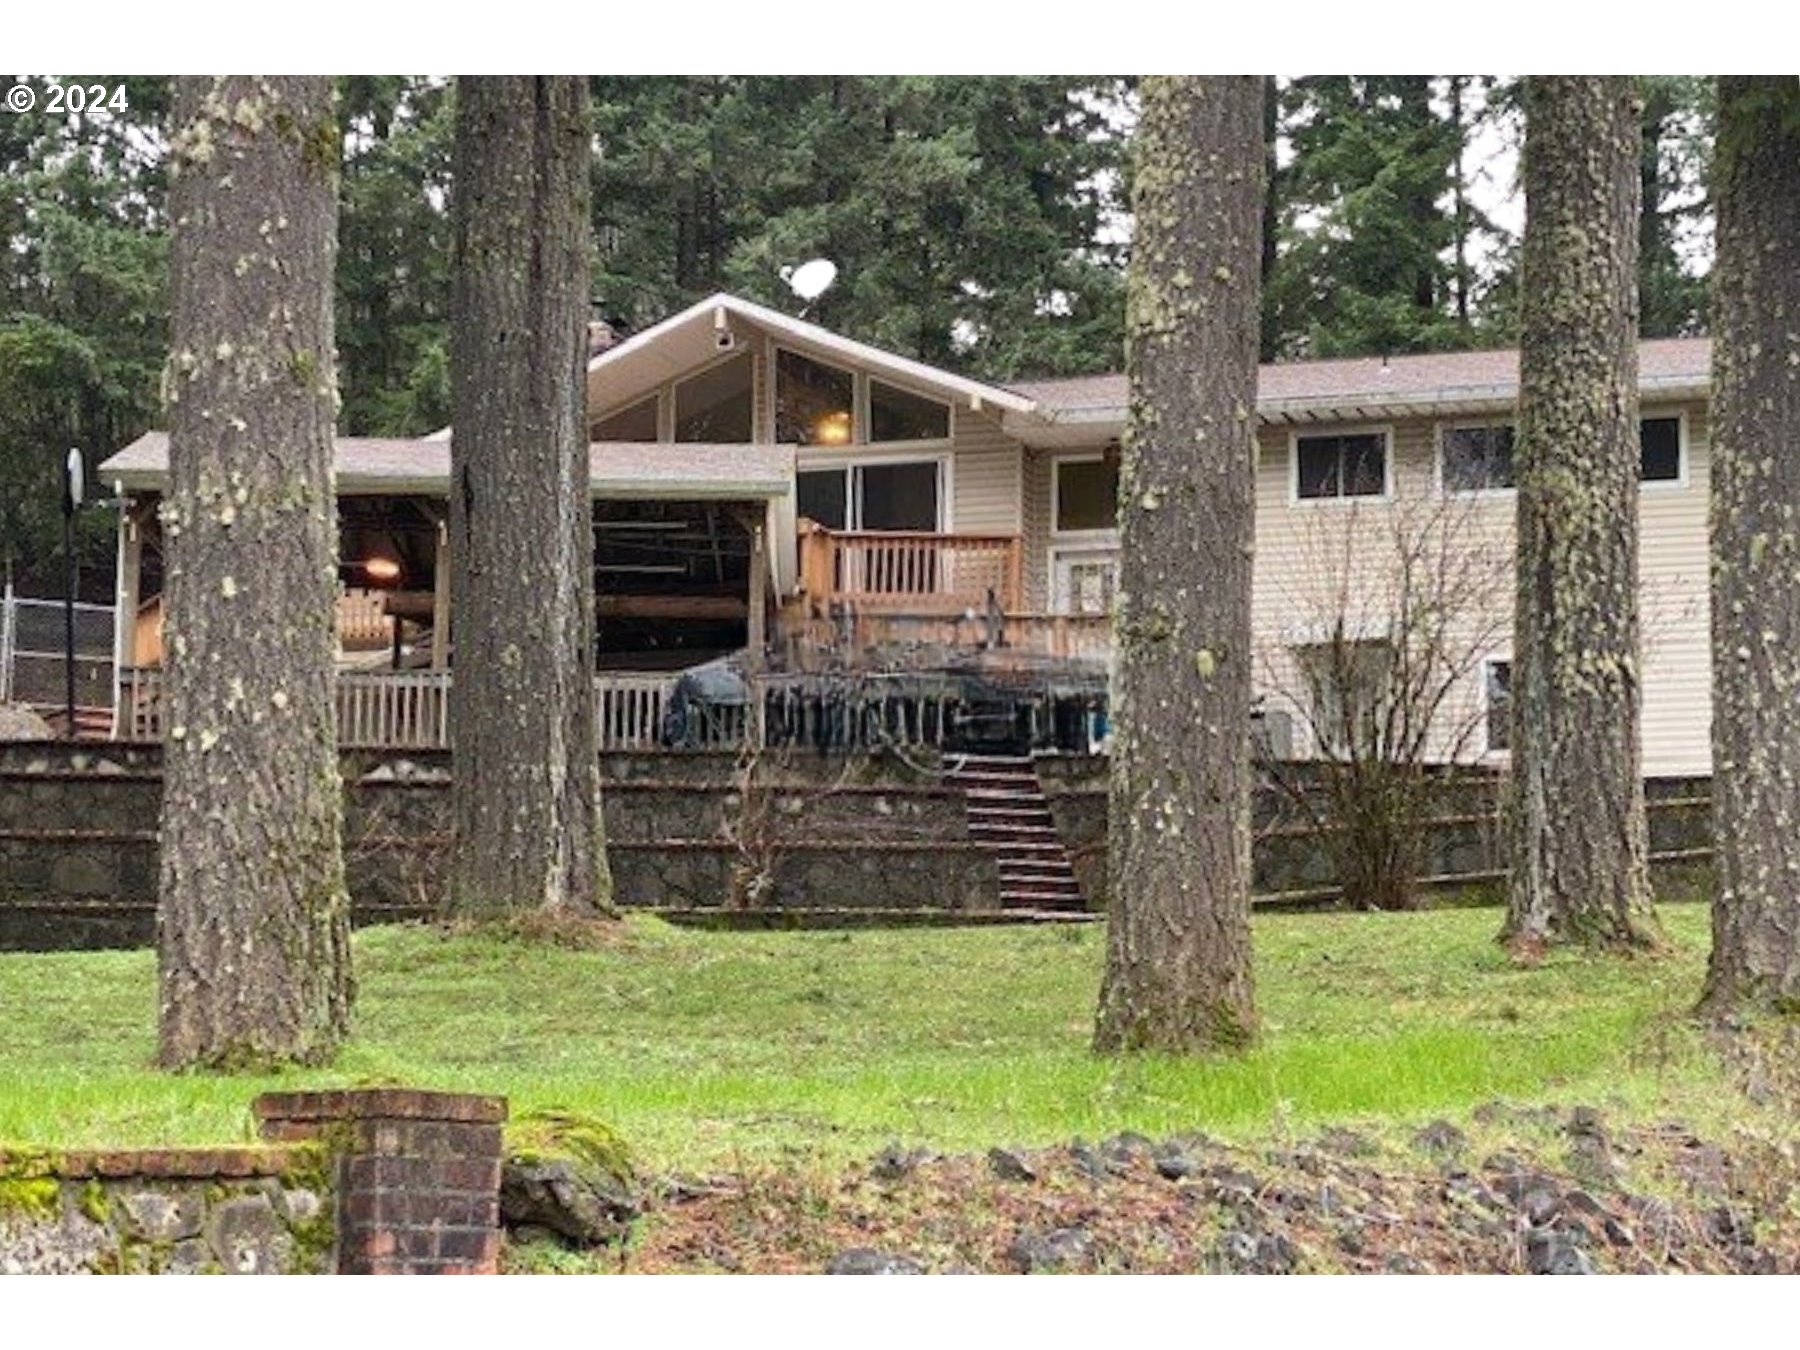 55375 PIONEER RD, Scappoose, OR 